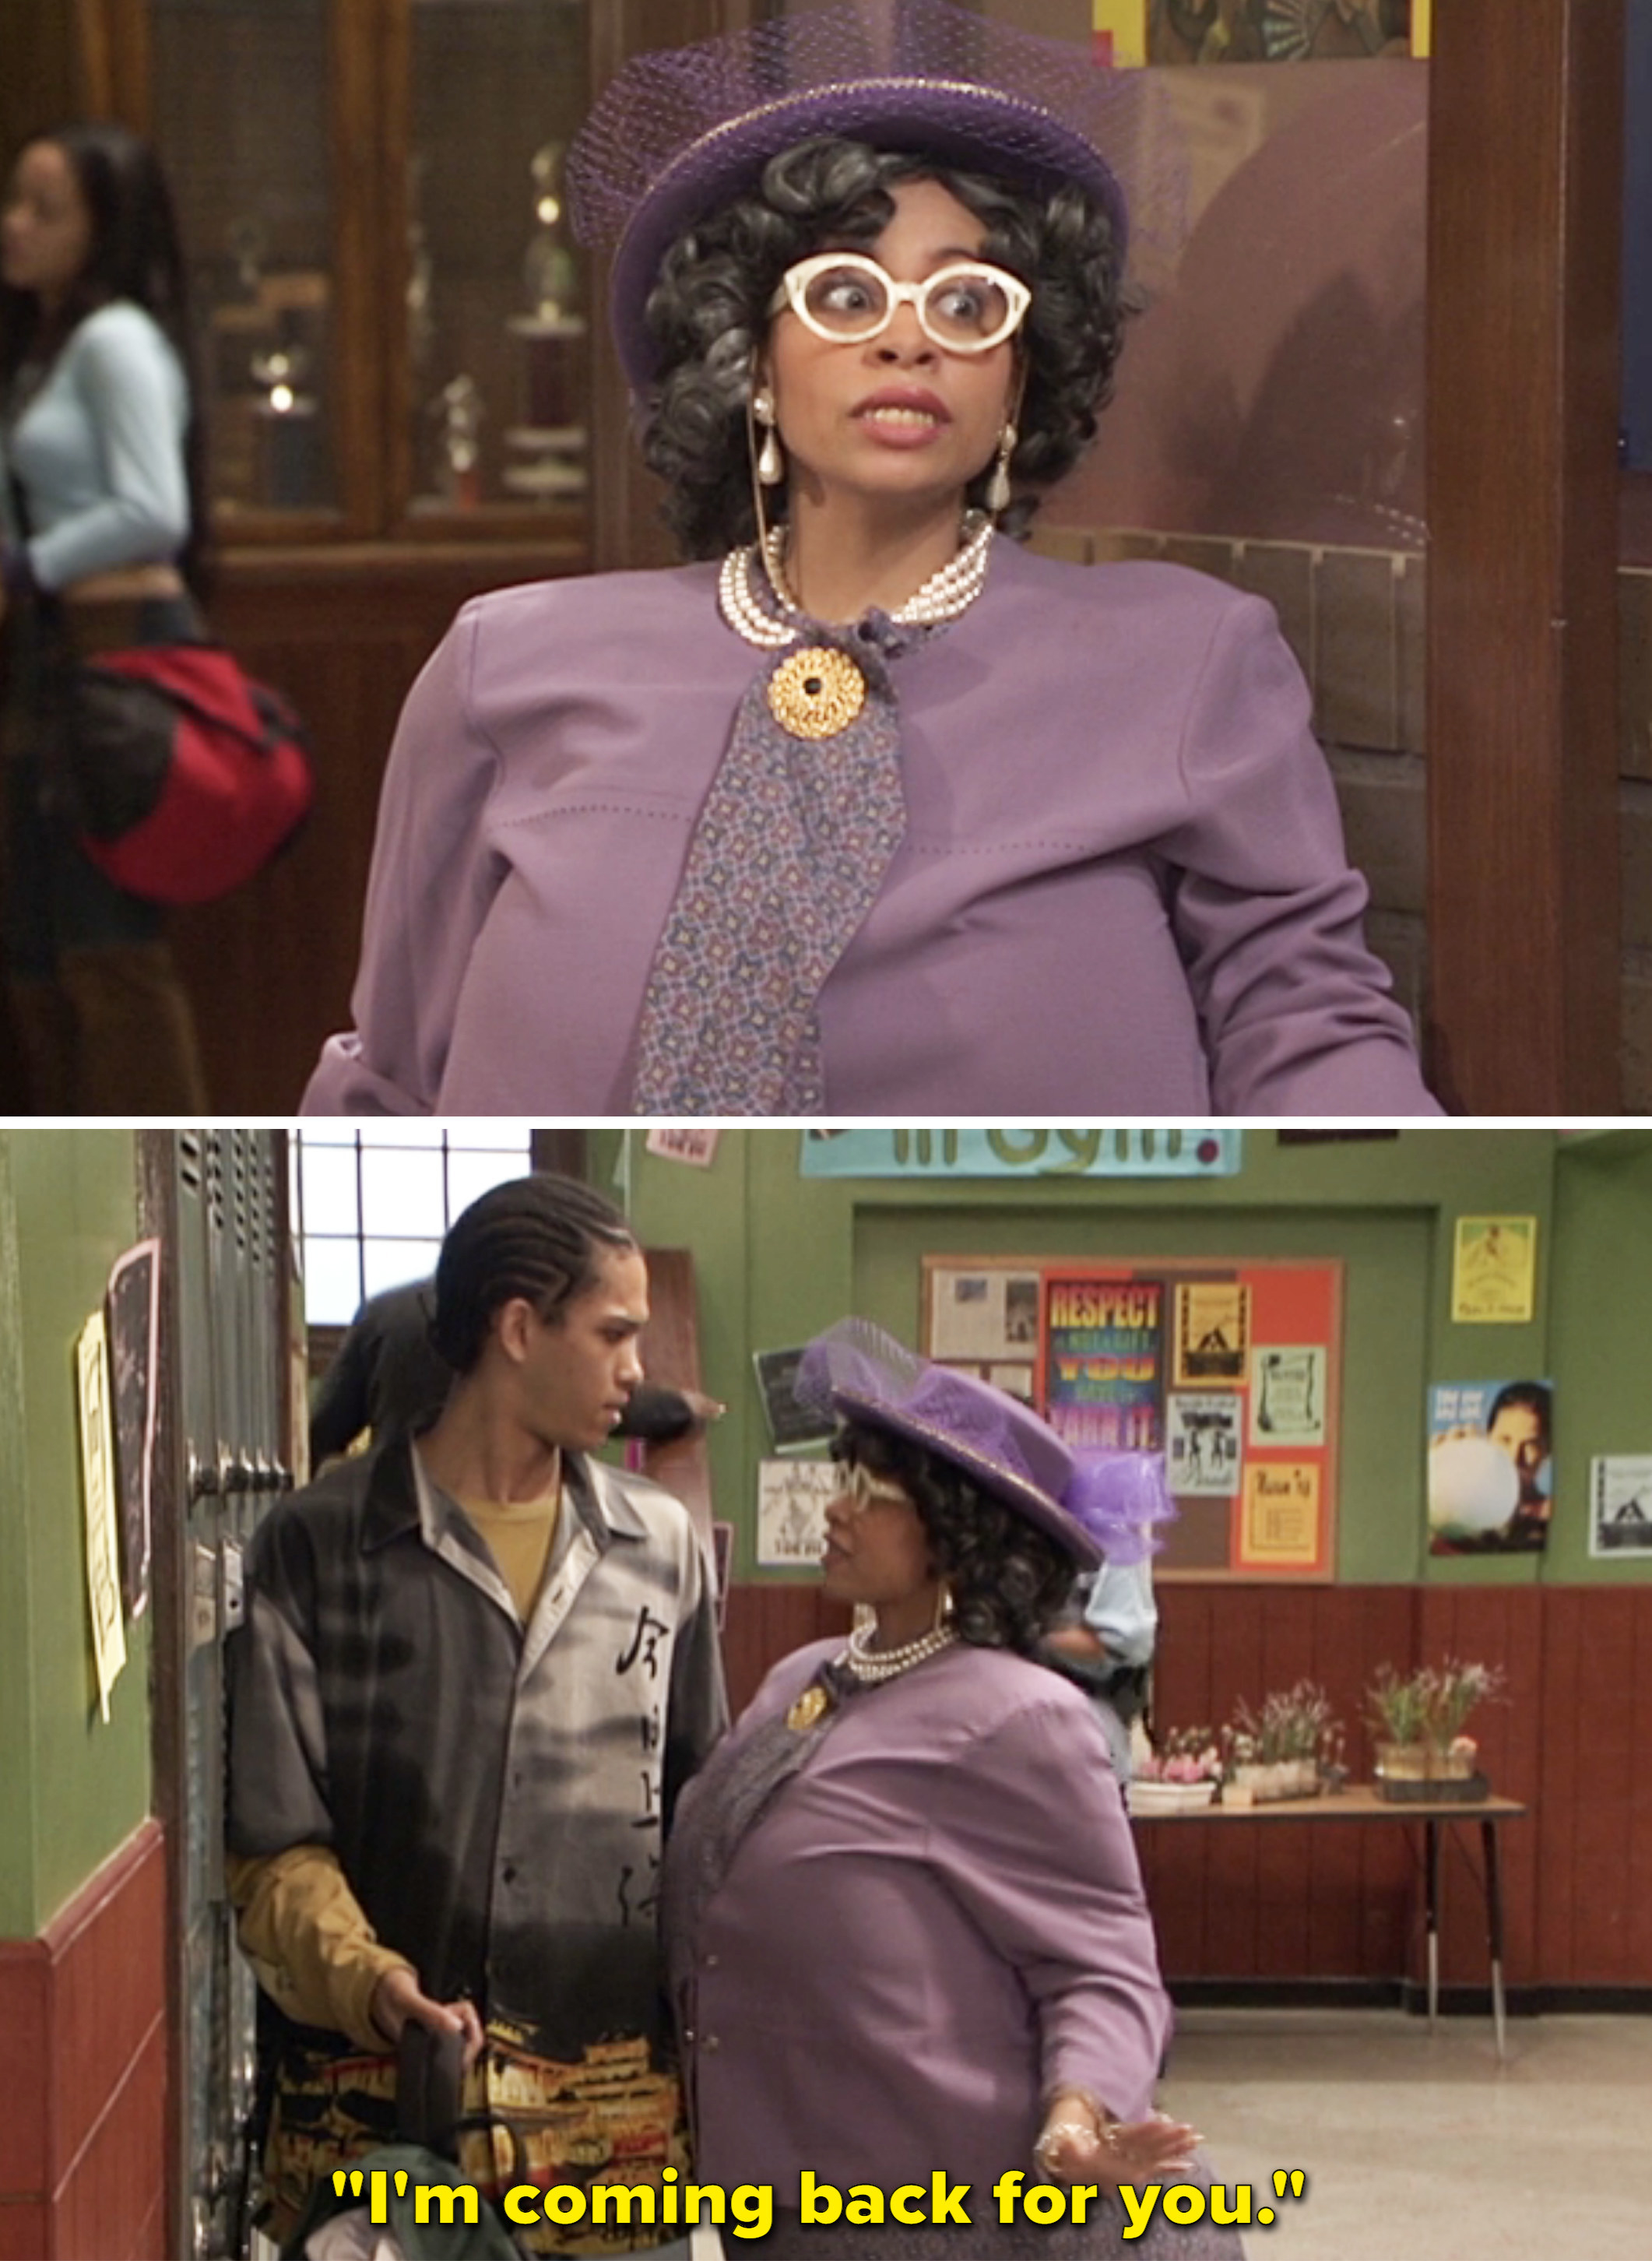 raven dressed like an older woman with a skirt suit and hat